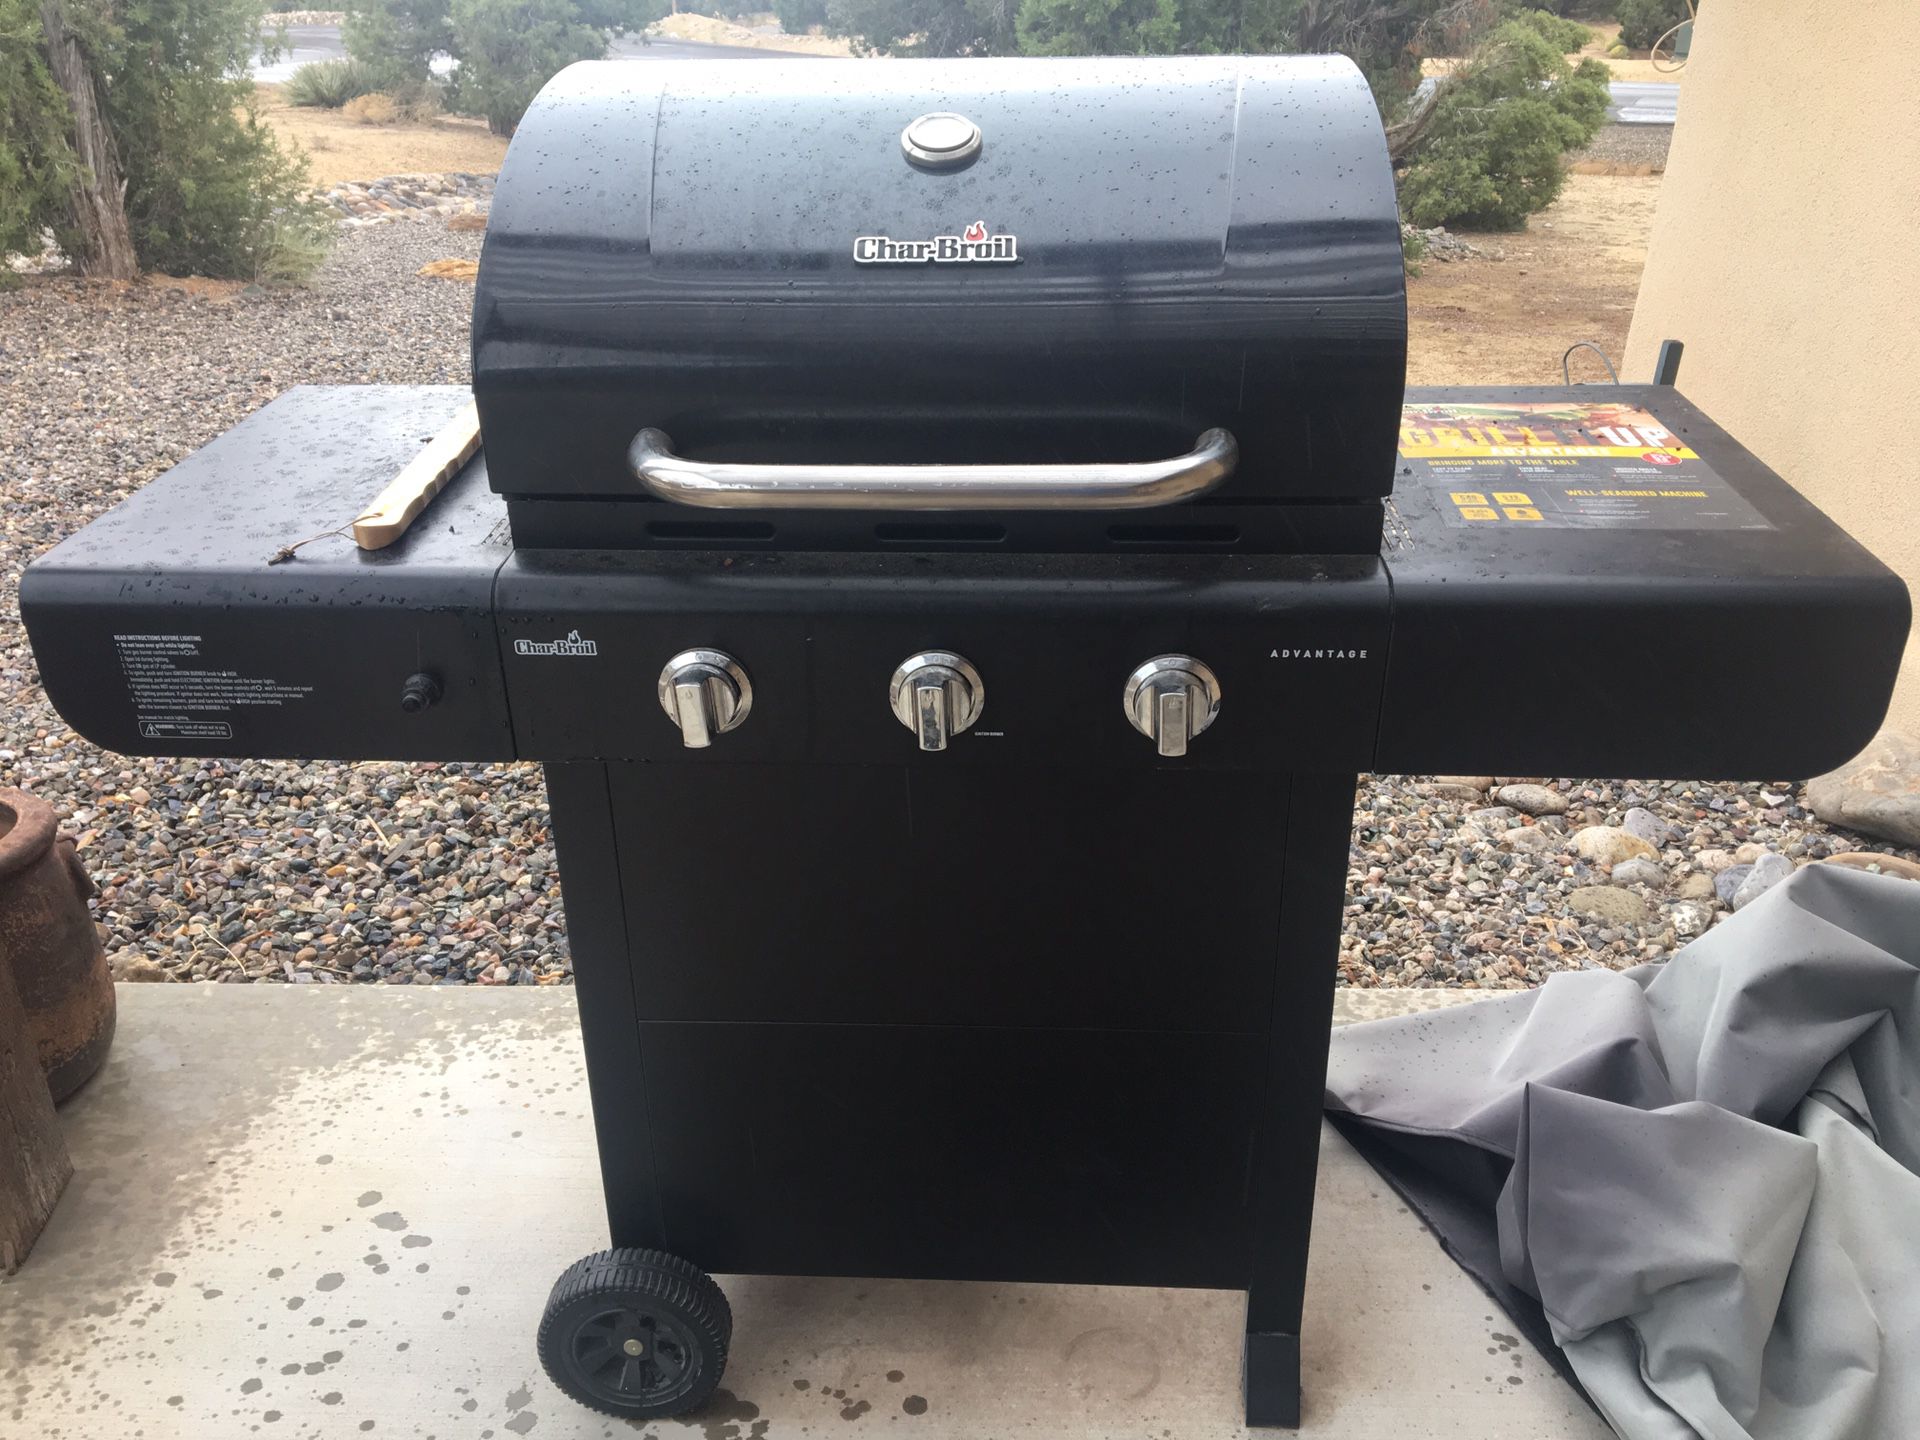 Charbroil gas grill w cover